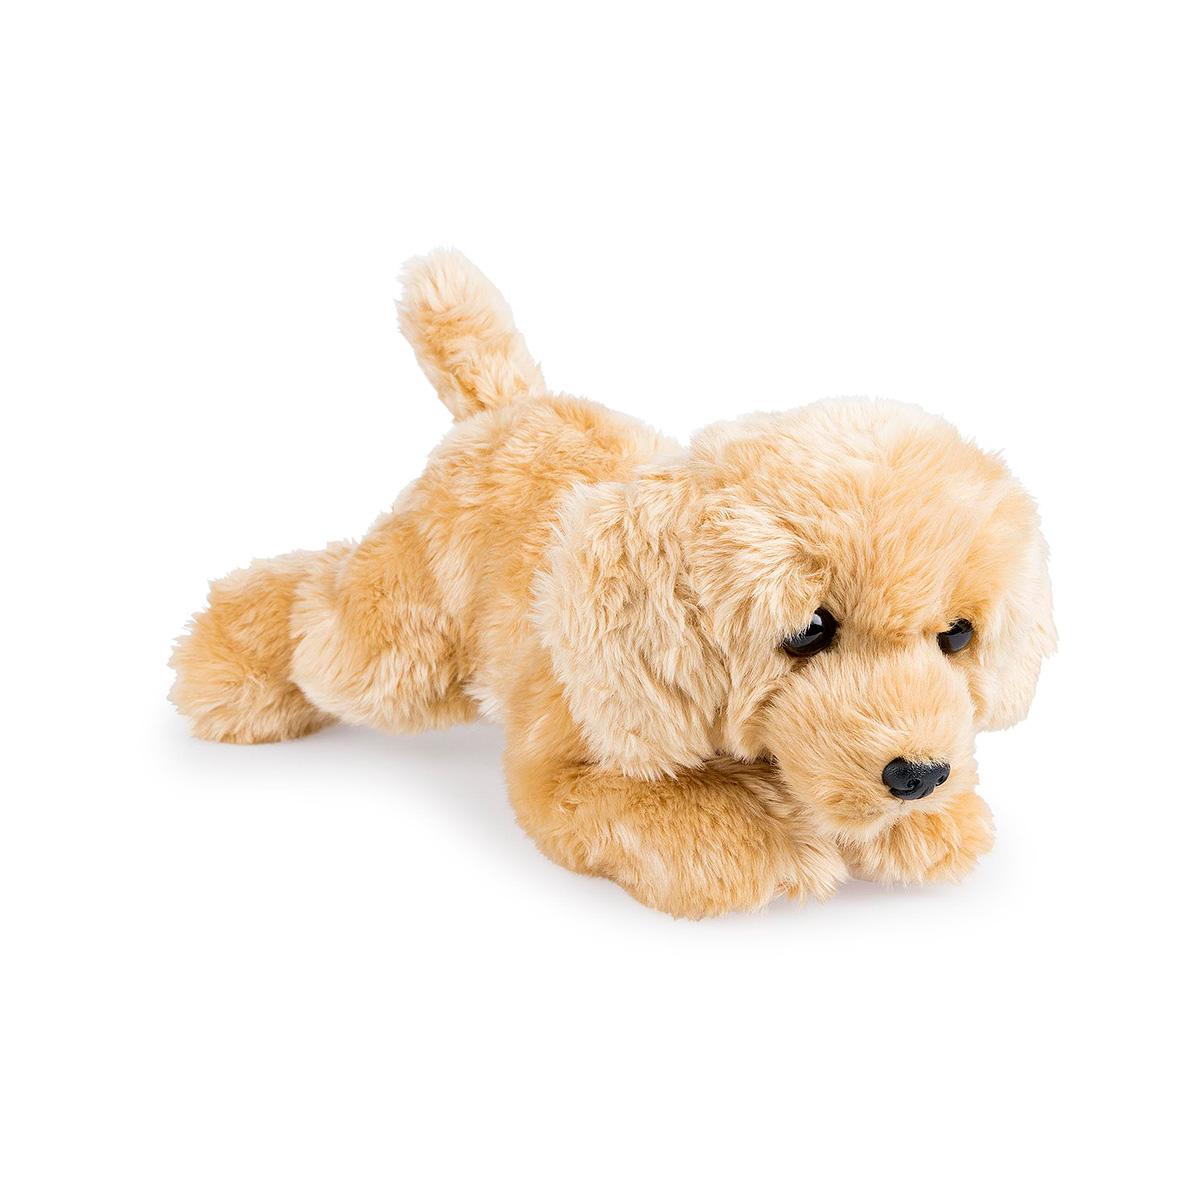  Goldie The Dog Plush Toy